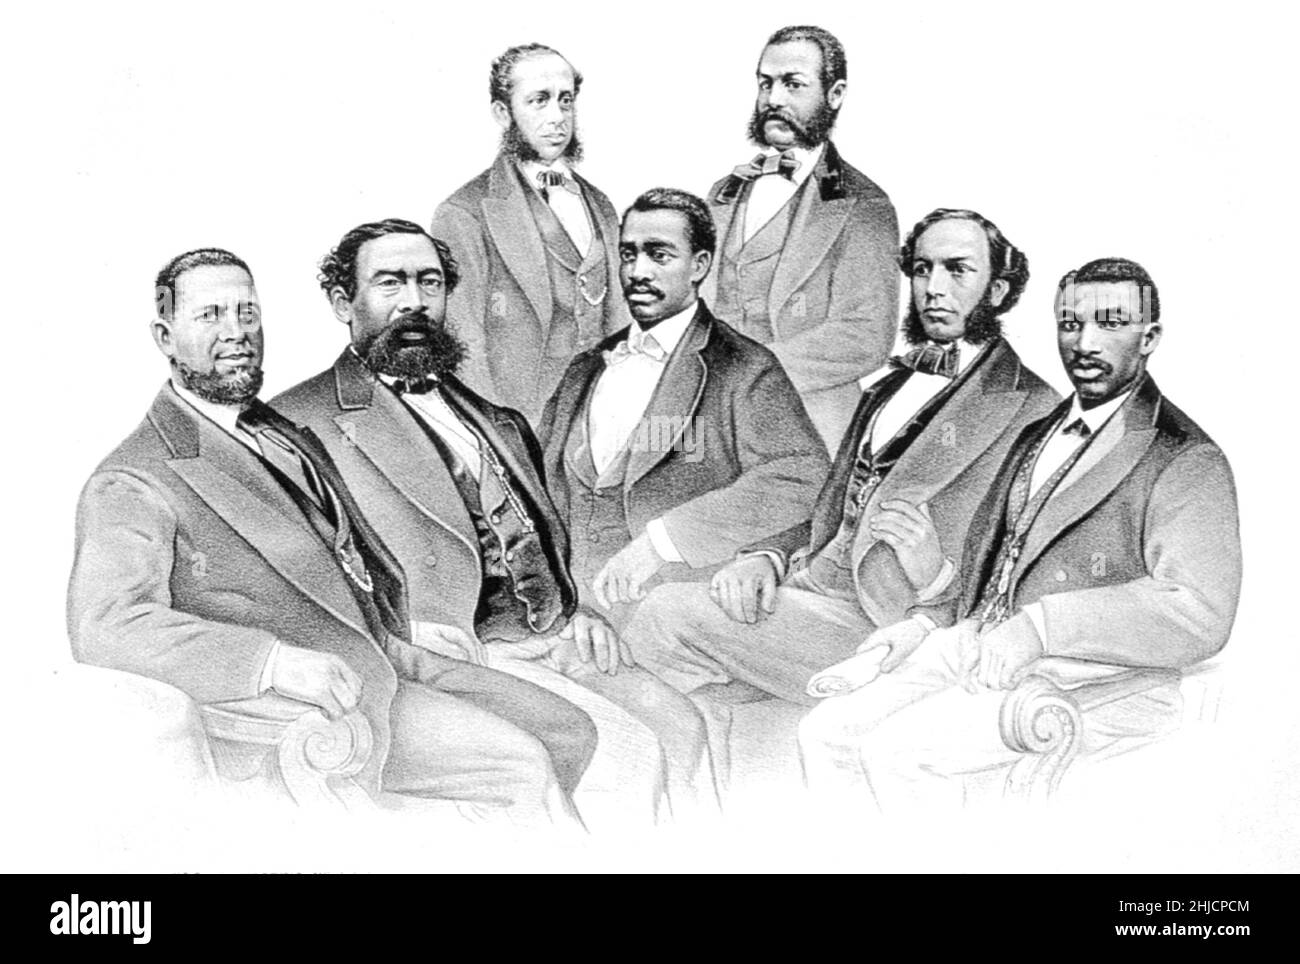 Group portrait of the first Black legislators in the 41st and 42nd Congress of the United States: (from left, front) Robert C. De Large, Jefferson H. Long, Senator Hiram R. Revels, Benjamin S. Turner, Josiah T. Walls, (from left, back) Joseph H. Rainy [Rainey], and R. Brown Elliot. Currier & Ives, 1872. Stock Photo